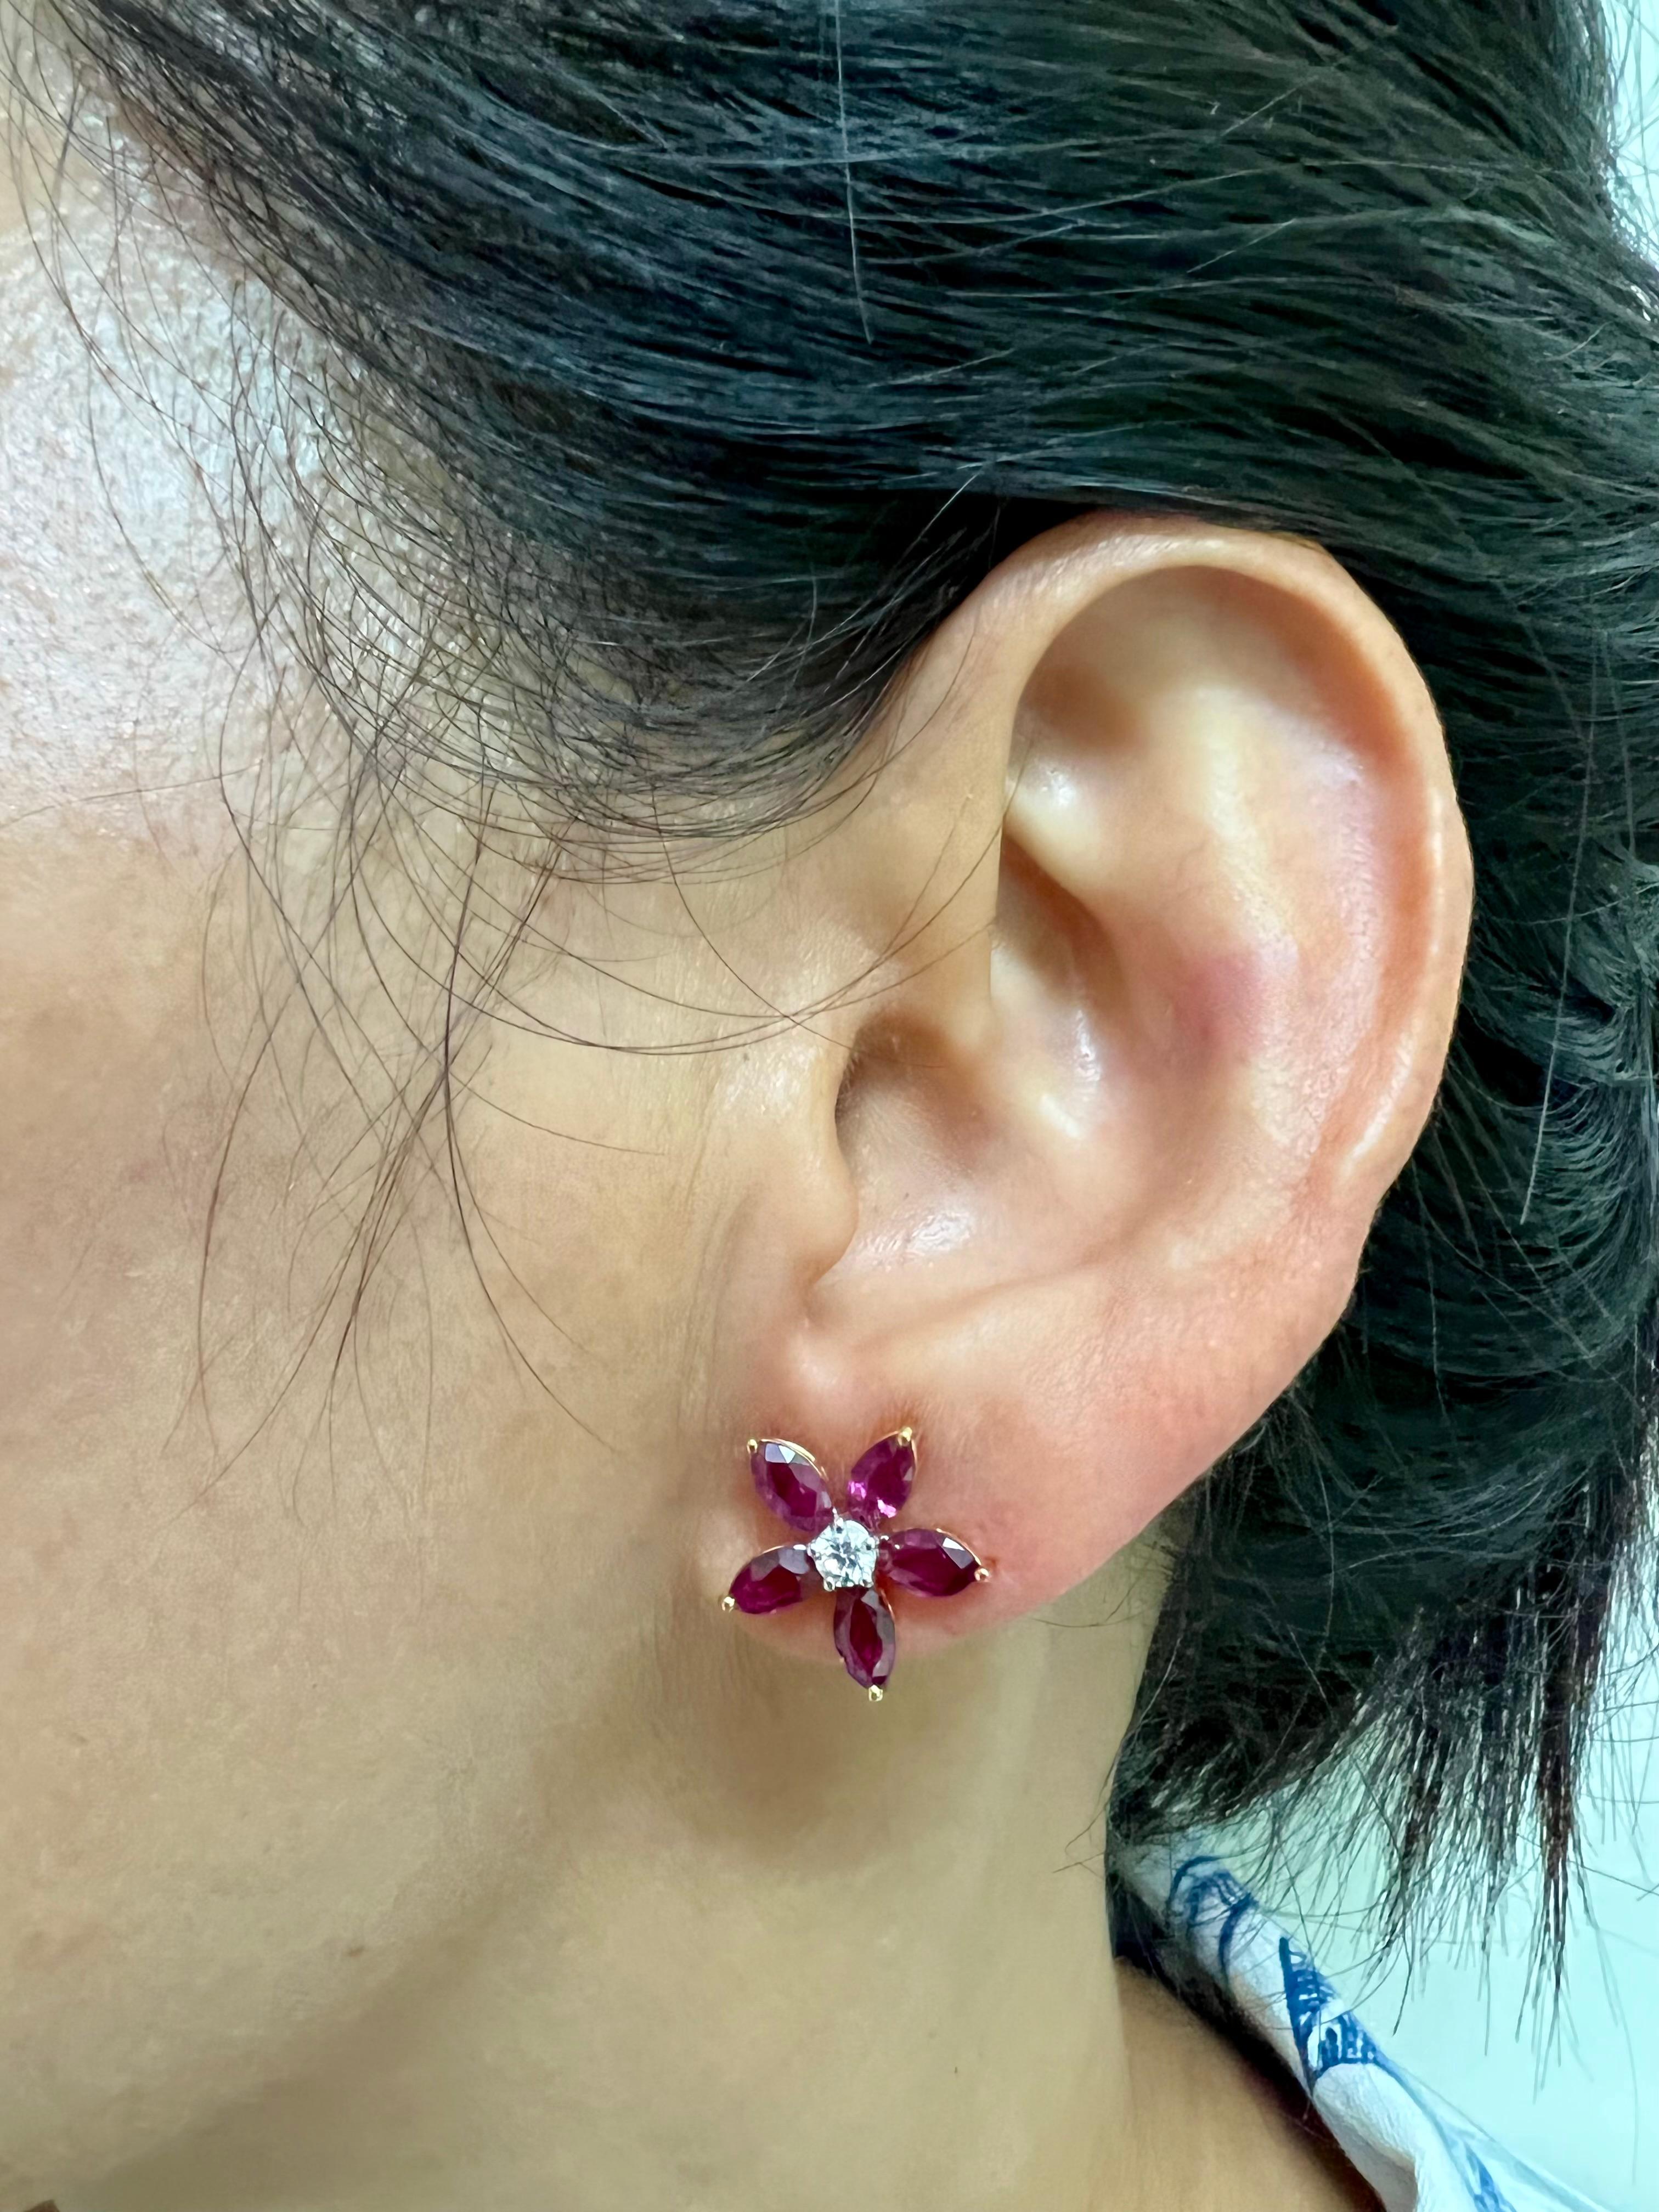 Please check out the HD video! These earrings GLOW! Here is a fantastic pair of bright red Ruby and diamond stud earrings. This flower earrings are absolutely beautiful and simple. The earrings are set in 18k Yellow gold. There are 10 marquise